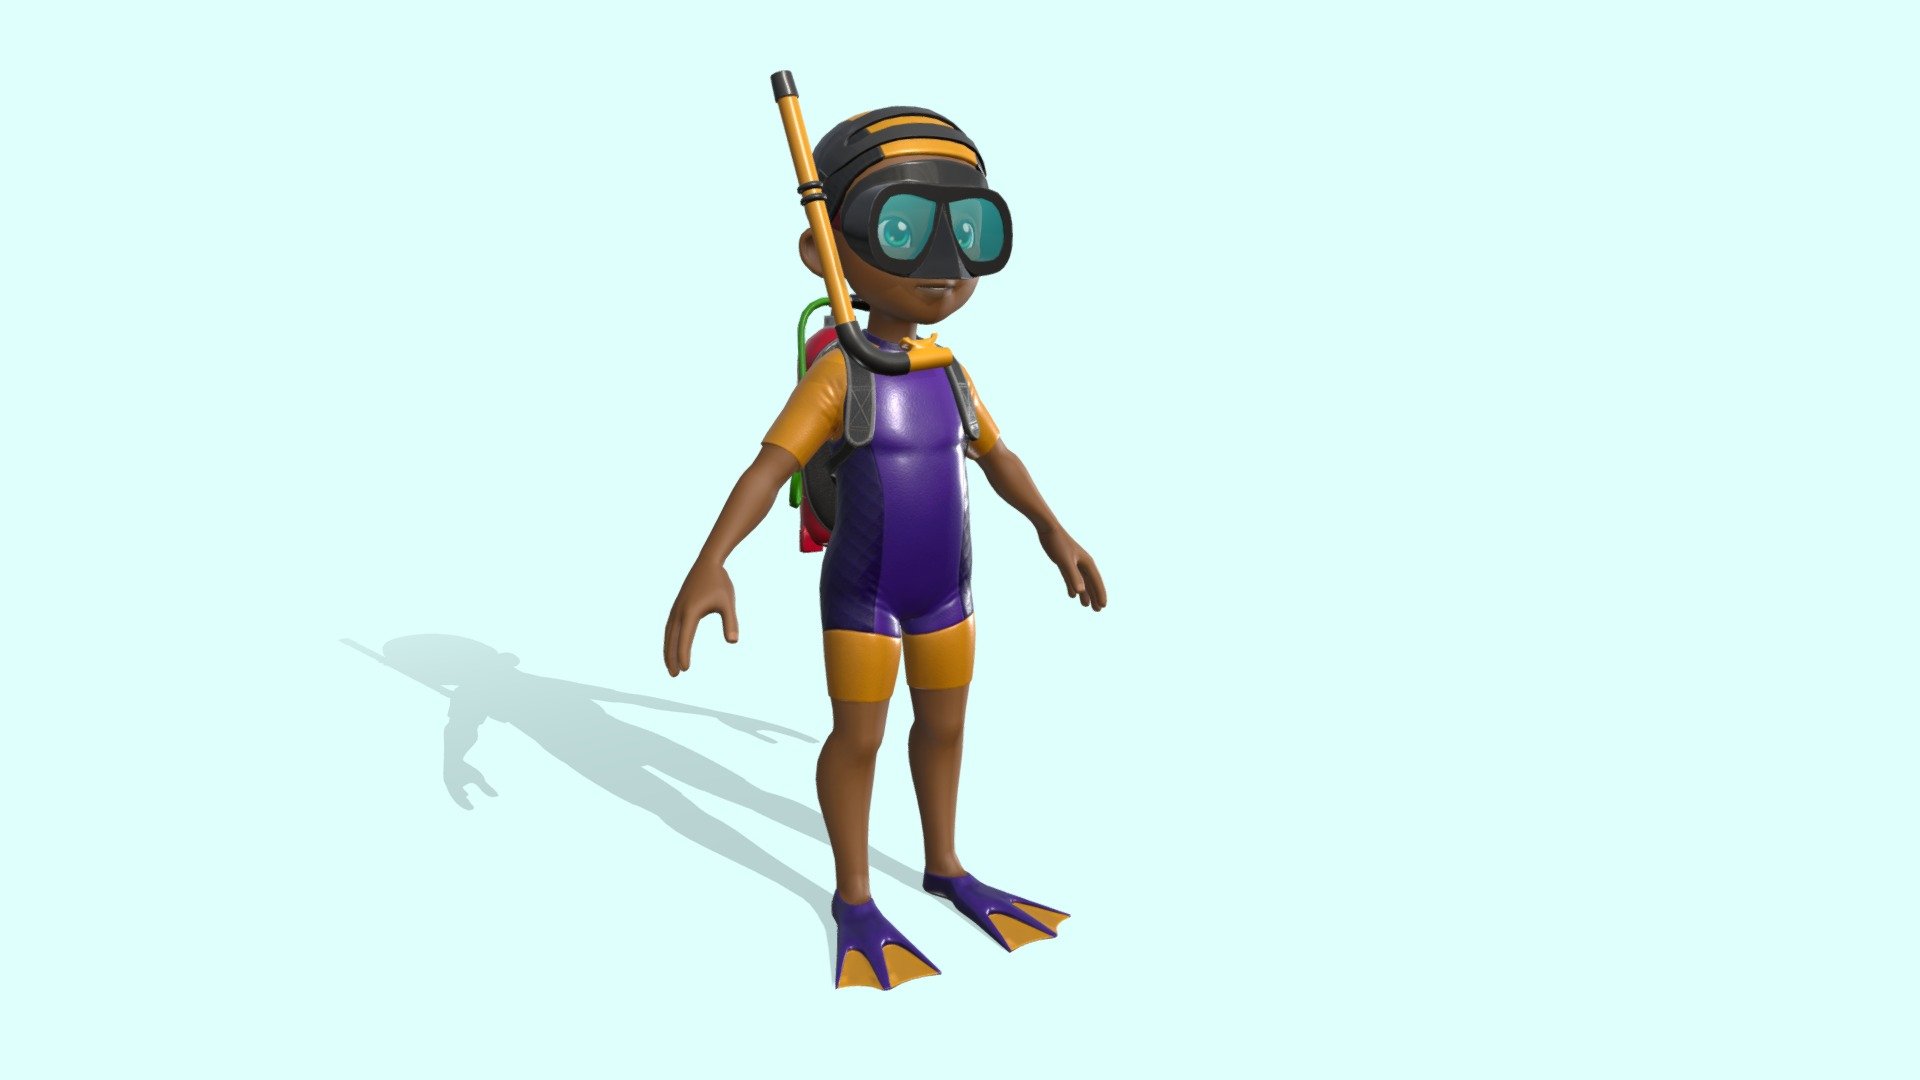 Diver Character from the KEKOS Tropical Beach package.

Ready to import in your preferred videogame engine or 3D software.

FORMAT:

FBX

POLYGON COUNT:

~21k Triangles

TEXTURES:

PBR Textures: Diffuse + Normal map + Metallic (R) / Smoothness (A) / Ambient Oclussion (G)

Size: 2048x2048 for most of the assets. A few 4096x4096 for detailed parts.

PNG format

RIG:




Full human rig.

27 blendshapes for face expresions.

ANIMATIONS:




Idle

Walk

Run

Jump

Floating

Sit
 - KEKOS Tropical Beach - Diver - Buy Royalty Free 3D model by Mameshiba Games (@MameshibaGames) 3d model